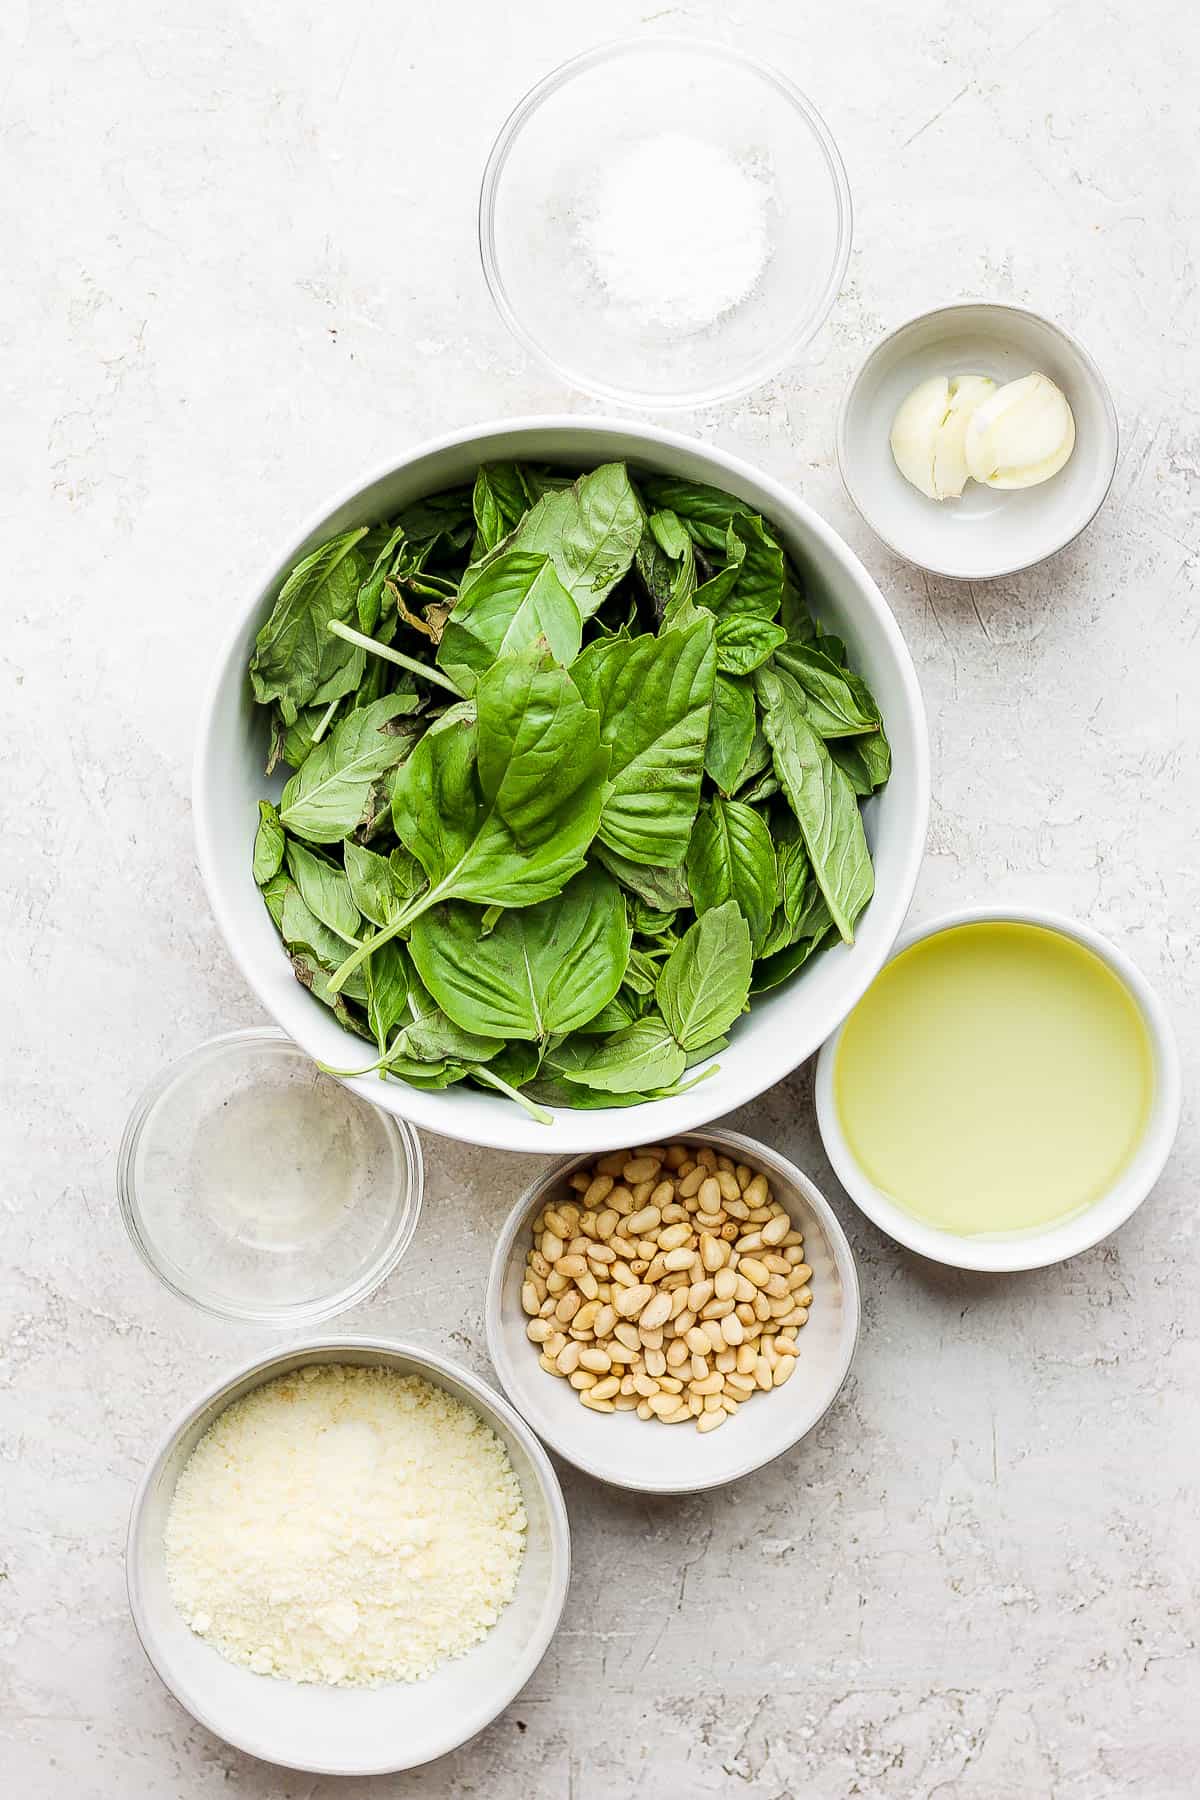 Ingredients for homemade pesto in separate bowls.